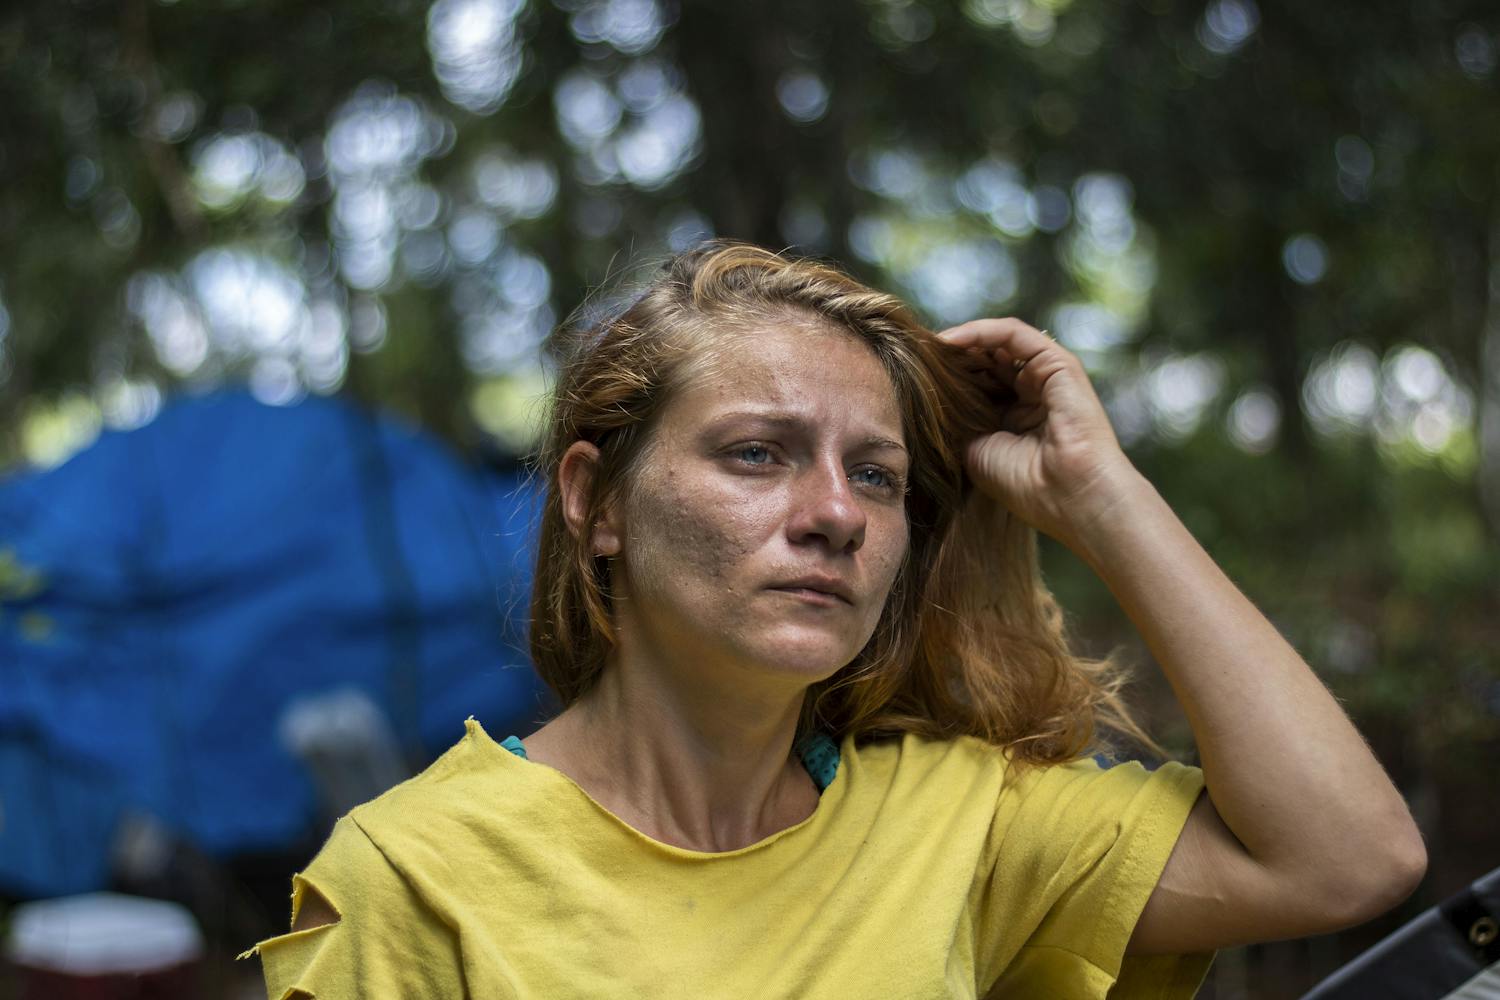 Amanda Smith, a 31-year-old Dignity Village resident, stands in front of her camp located on the outskirts of the 10-acre property. Smith has lived there for four months. She wants to stay in Gainesville once it closes on Jan. 1, though she does not know where she will go.